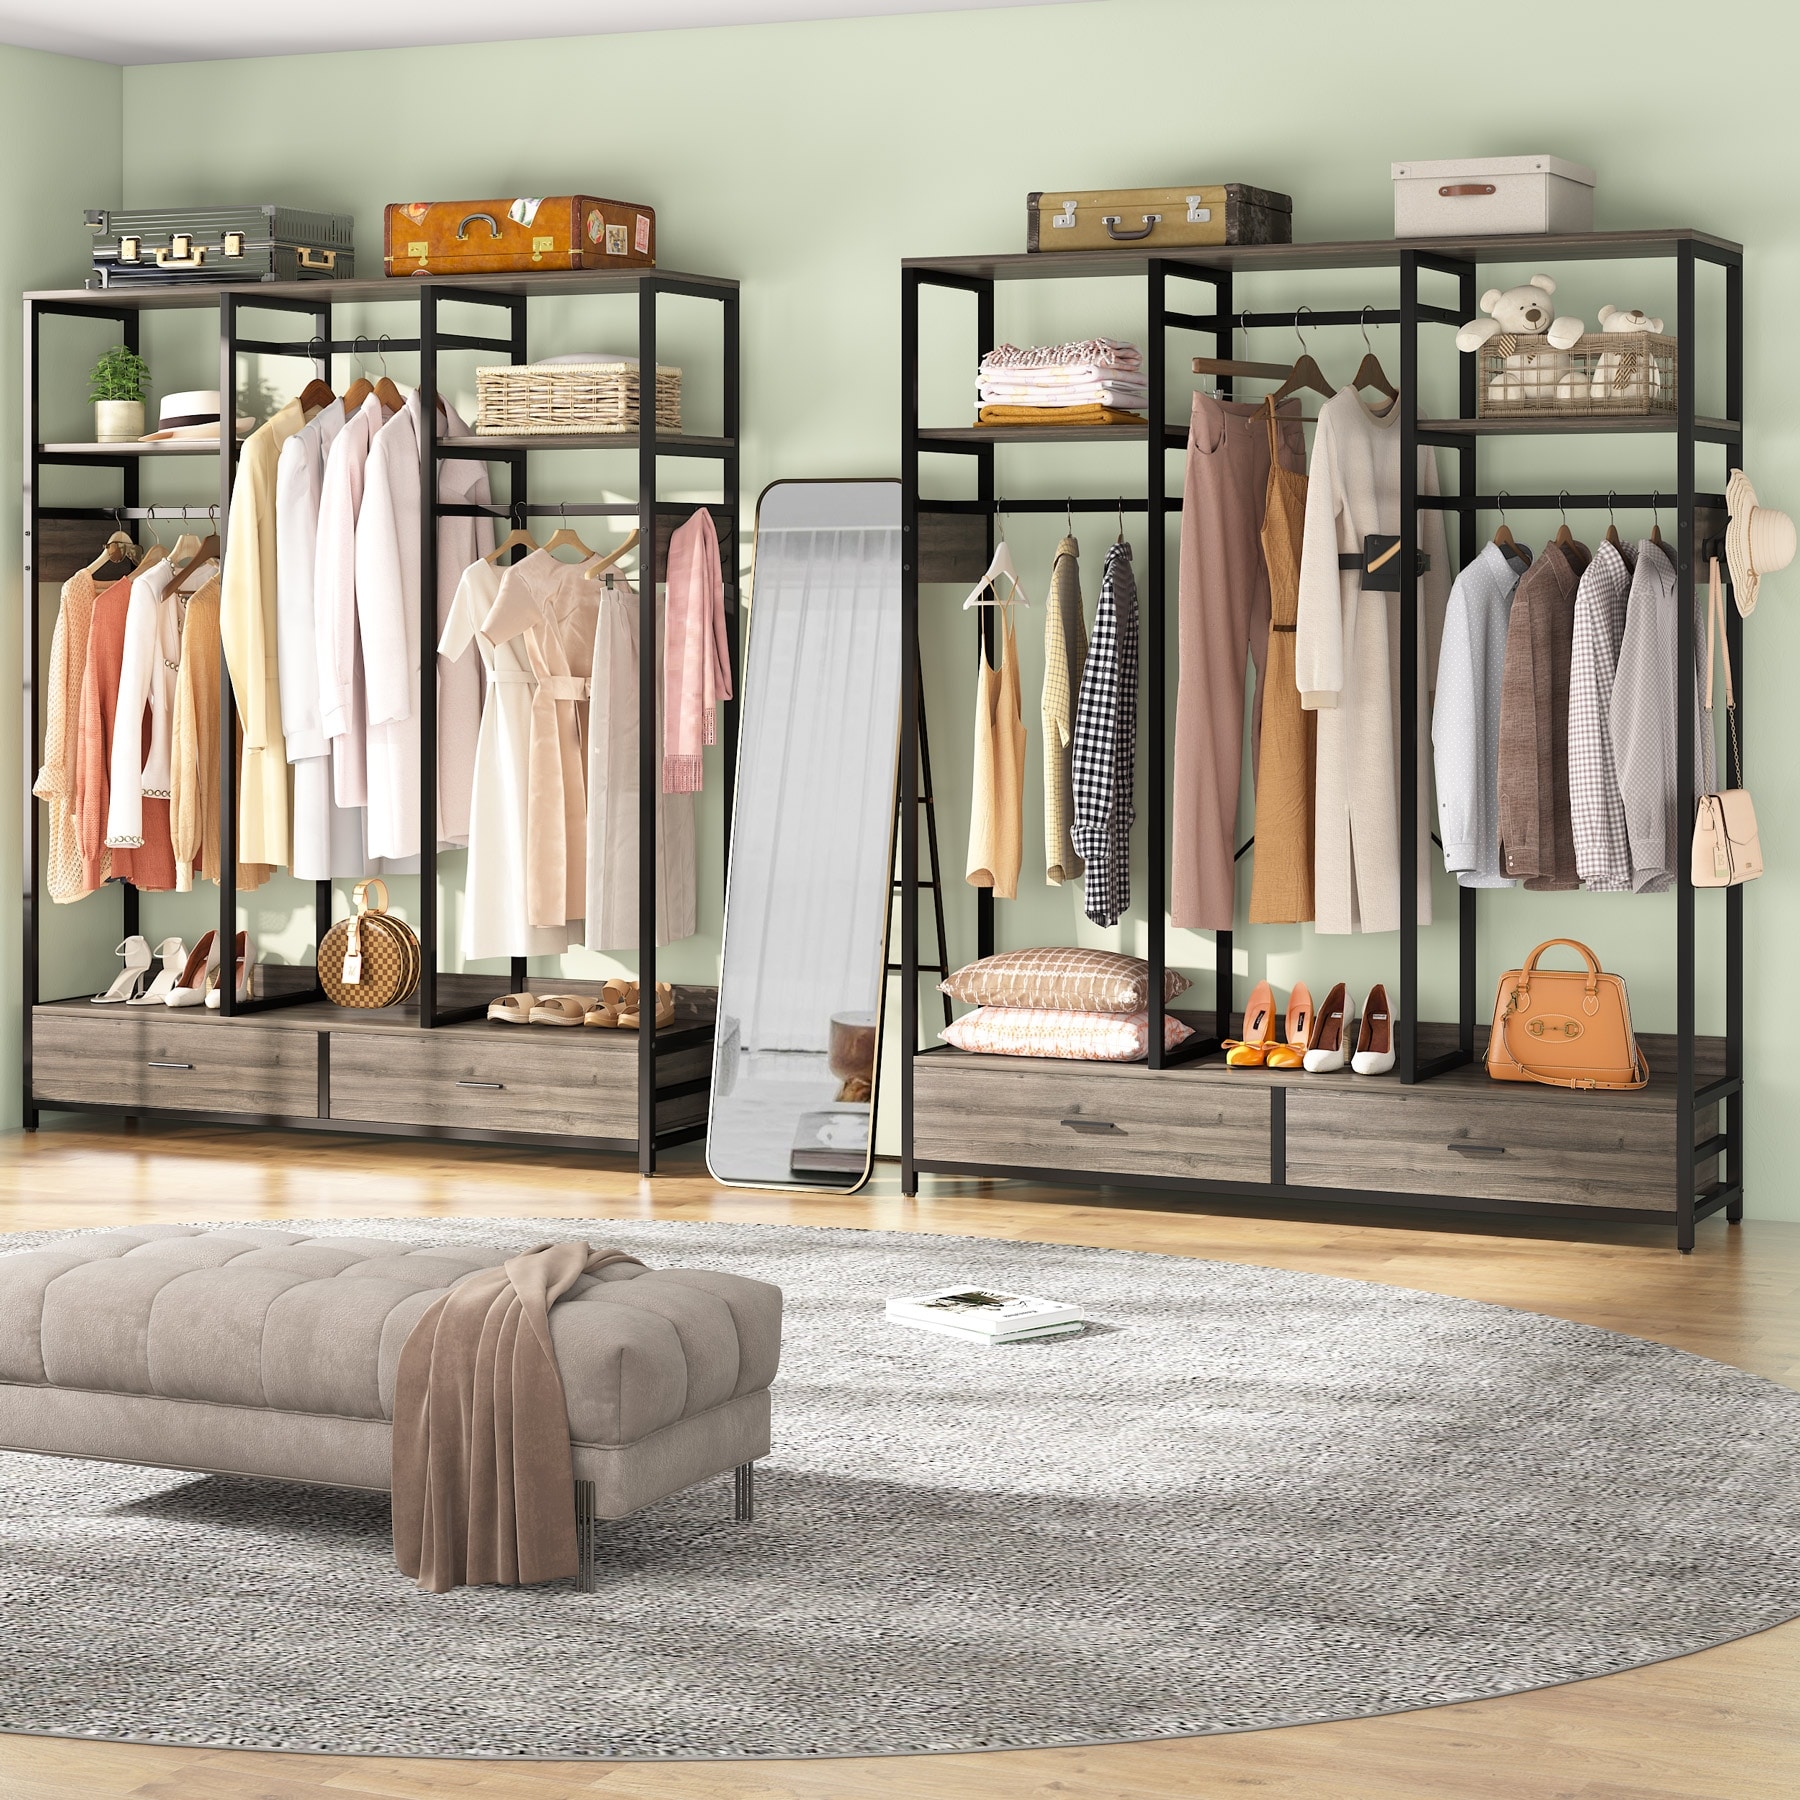 https://ak1.ostkcdn.com/images/products/is/images/direct/aedbd2bc0ffb61446796ee05648ebabbfd428248/Freestanding-Closet-Organizer-with-Drawers-and-Hanging-Rod-Clothes-Garment-Rack-Organizer.jpg